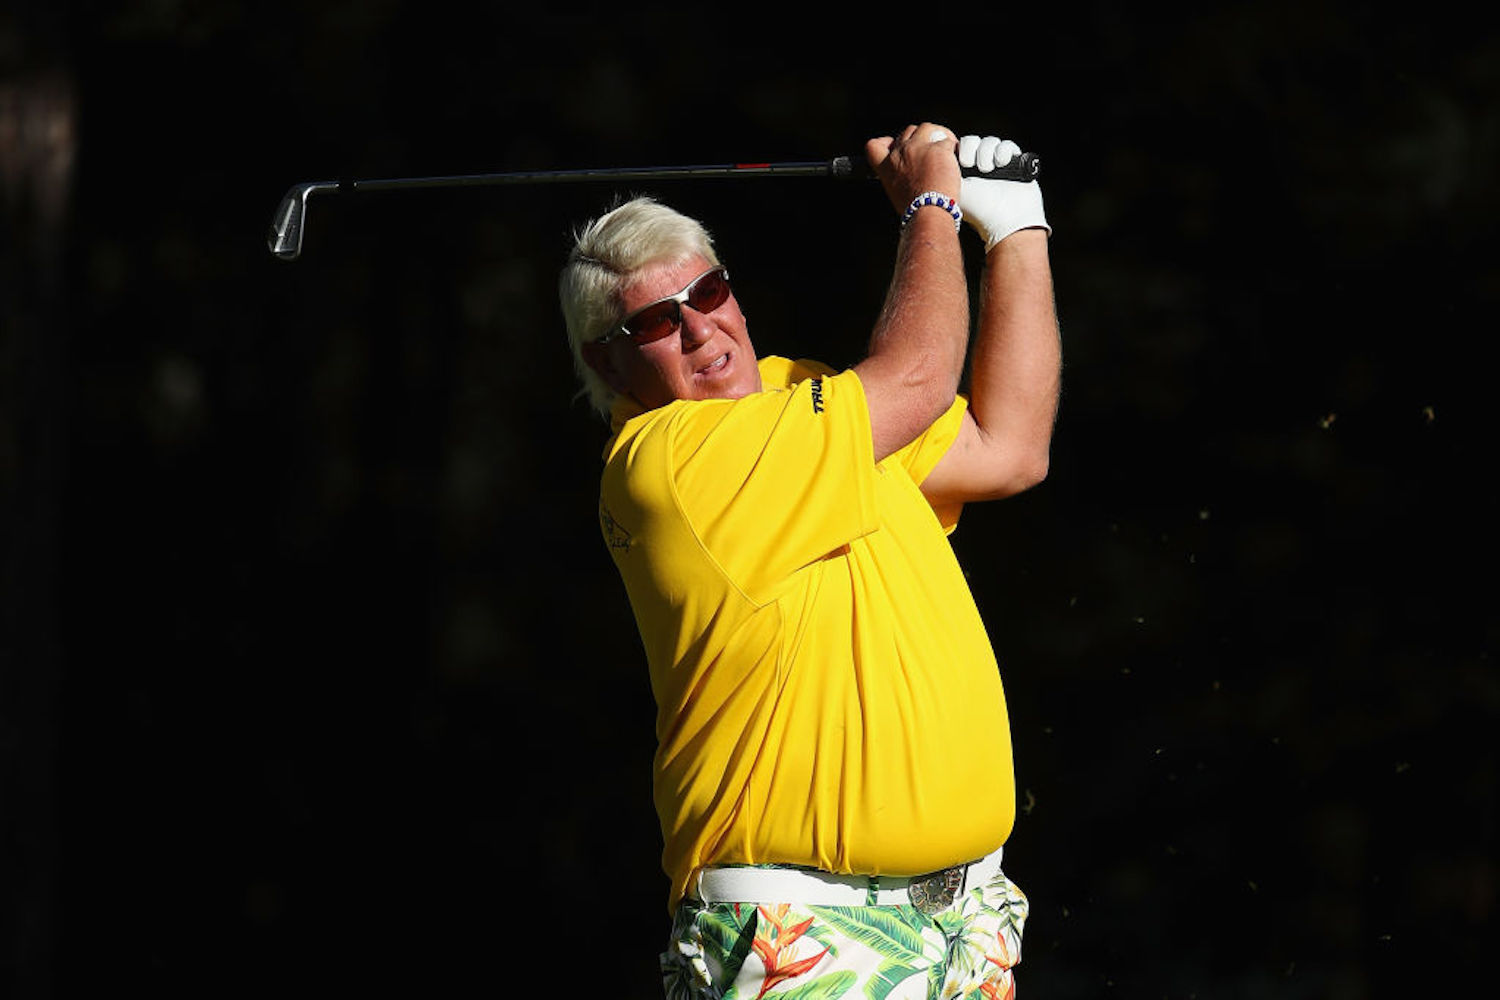 John Daly is no stranger to visiting casinos. One time, he walked out with $55,000 and threw it all off a bridge to spite his wife.